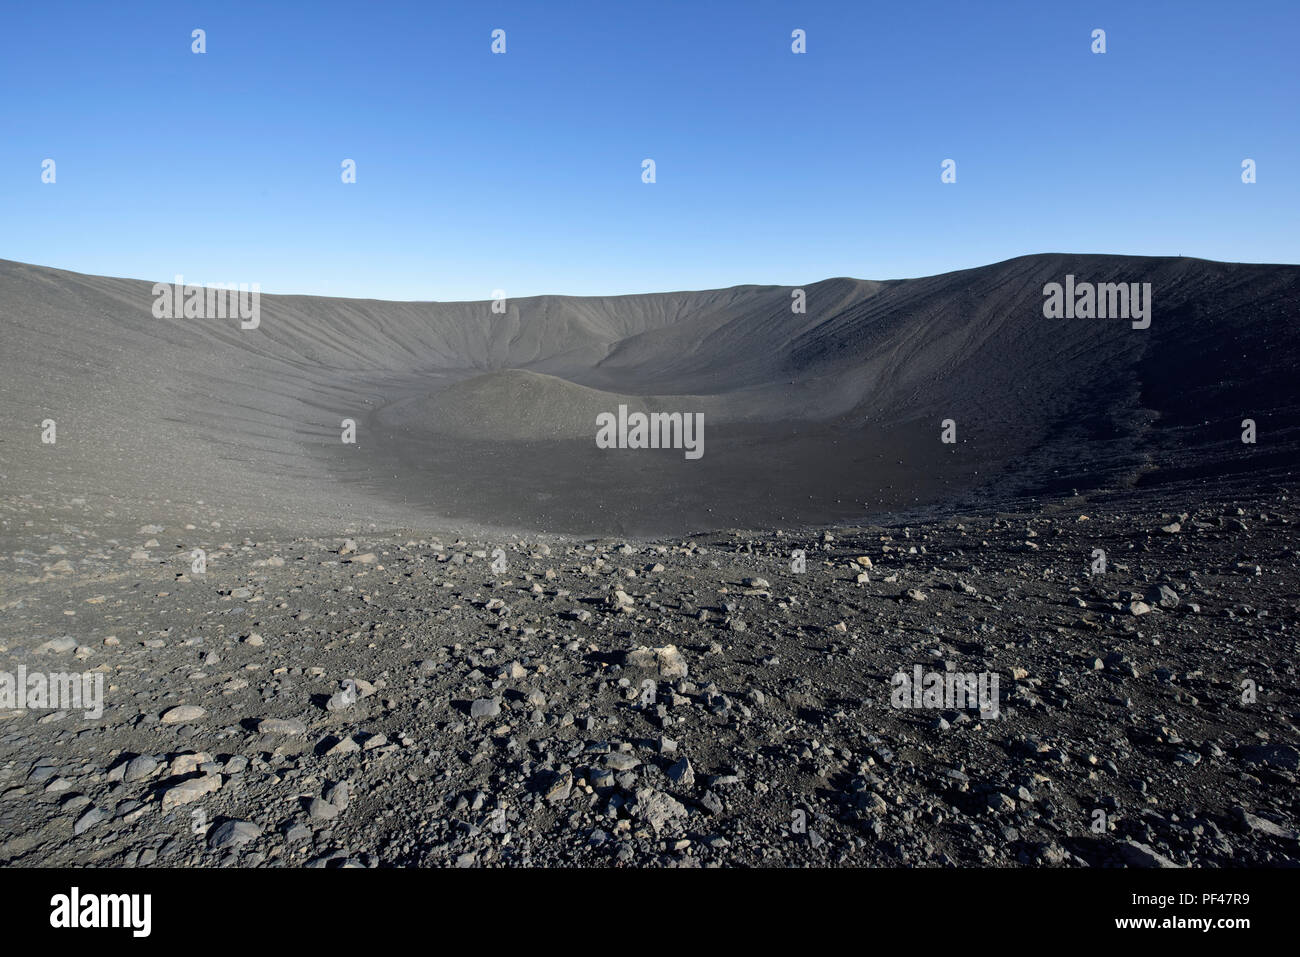 Hverfjall volcanic crater near lake Myvatn in Iceland, one of the largest volcanic craters in the world with diameter of almost 800m at the top Stock Photo